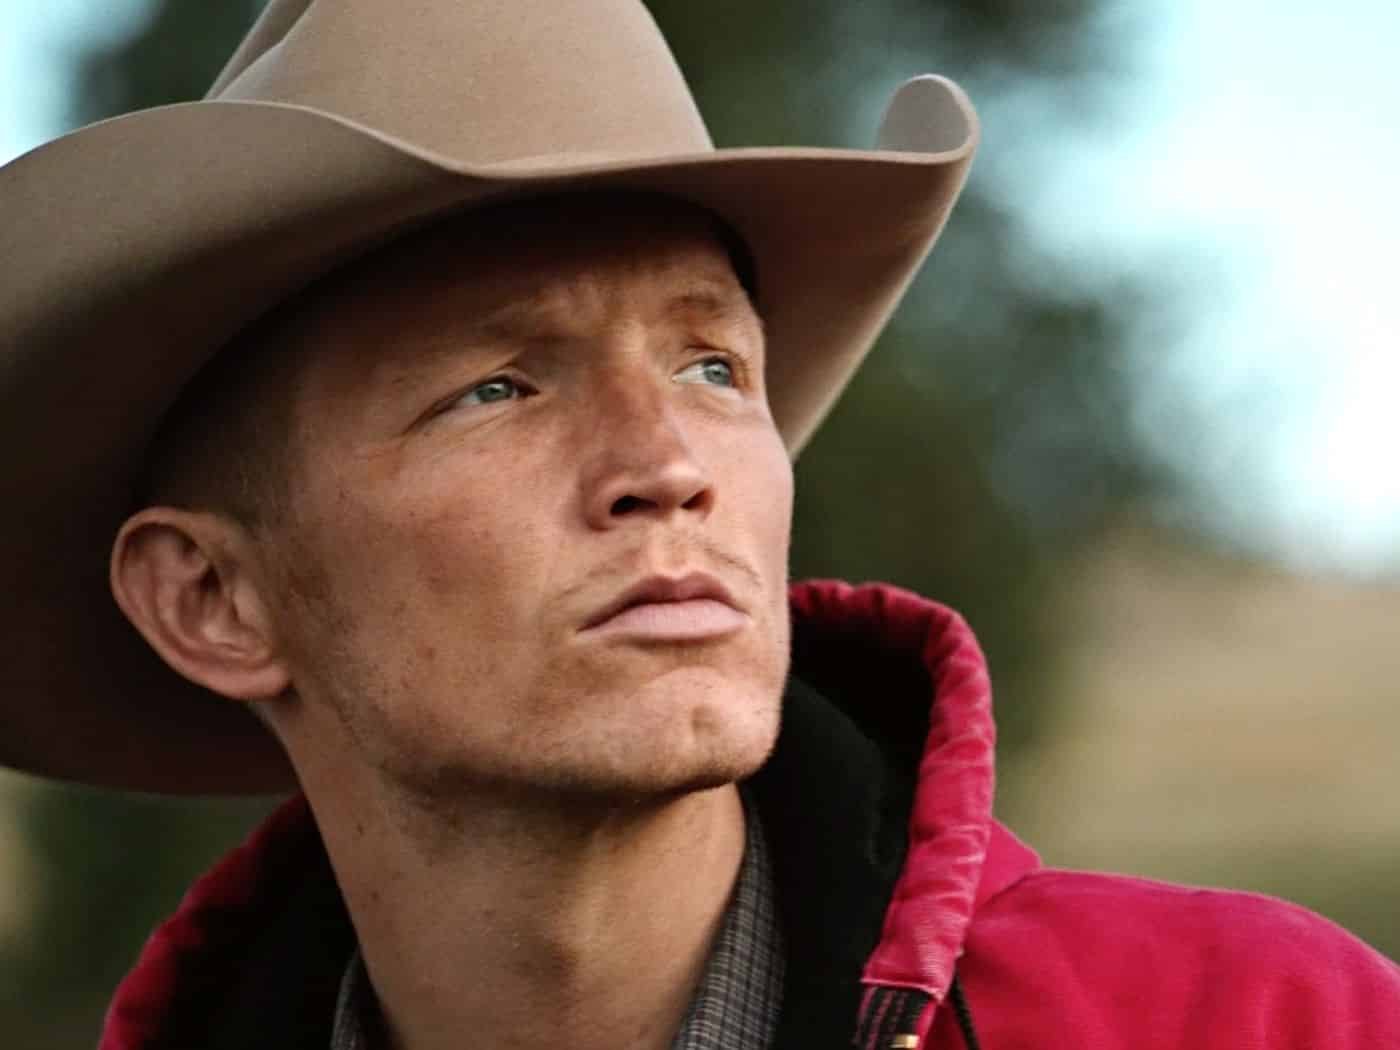 Jimmy is the Most Important Character in Yellowstone - Here is Why!